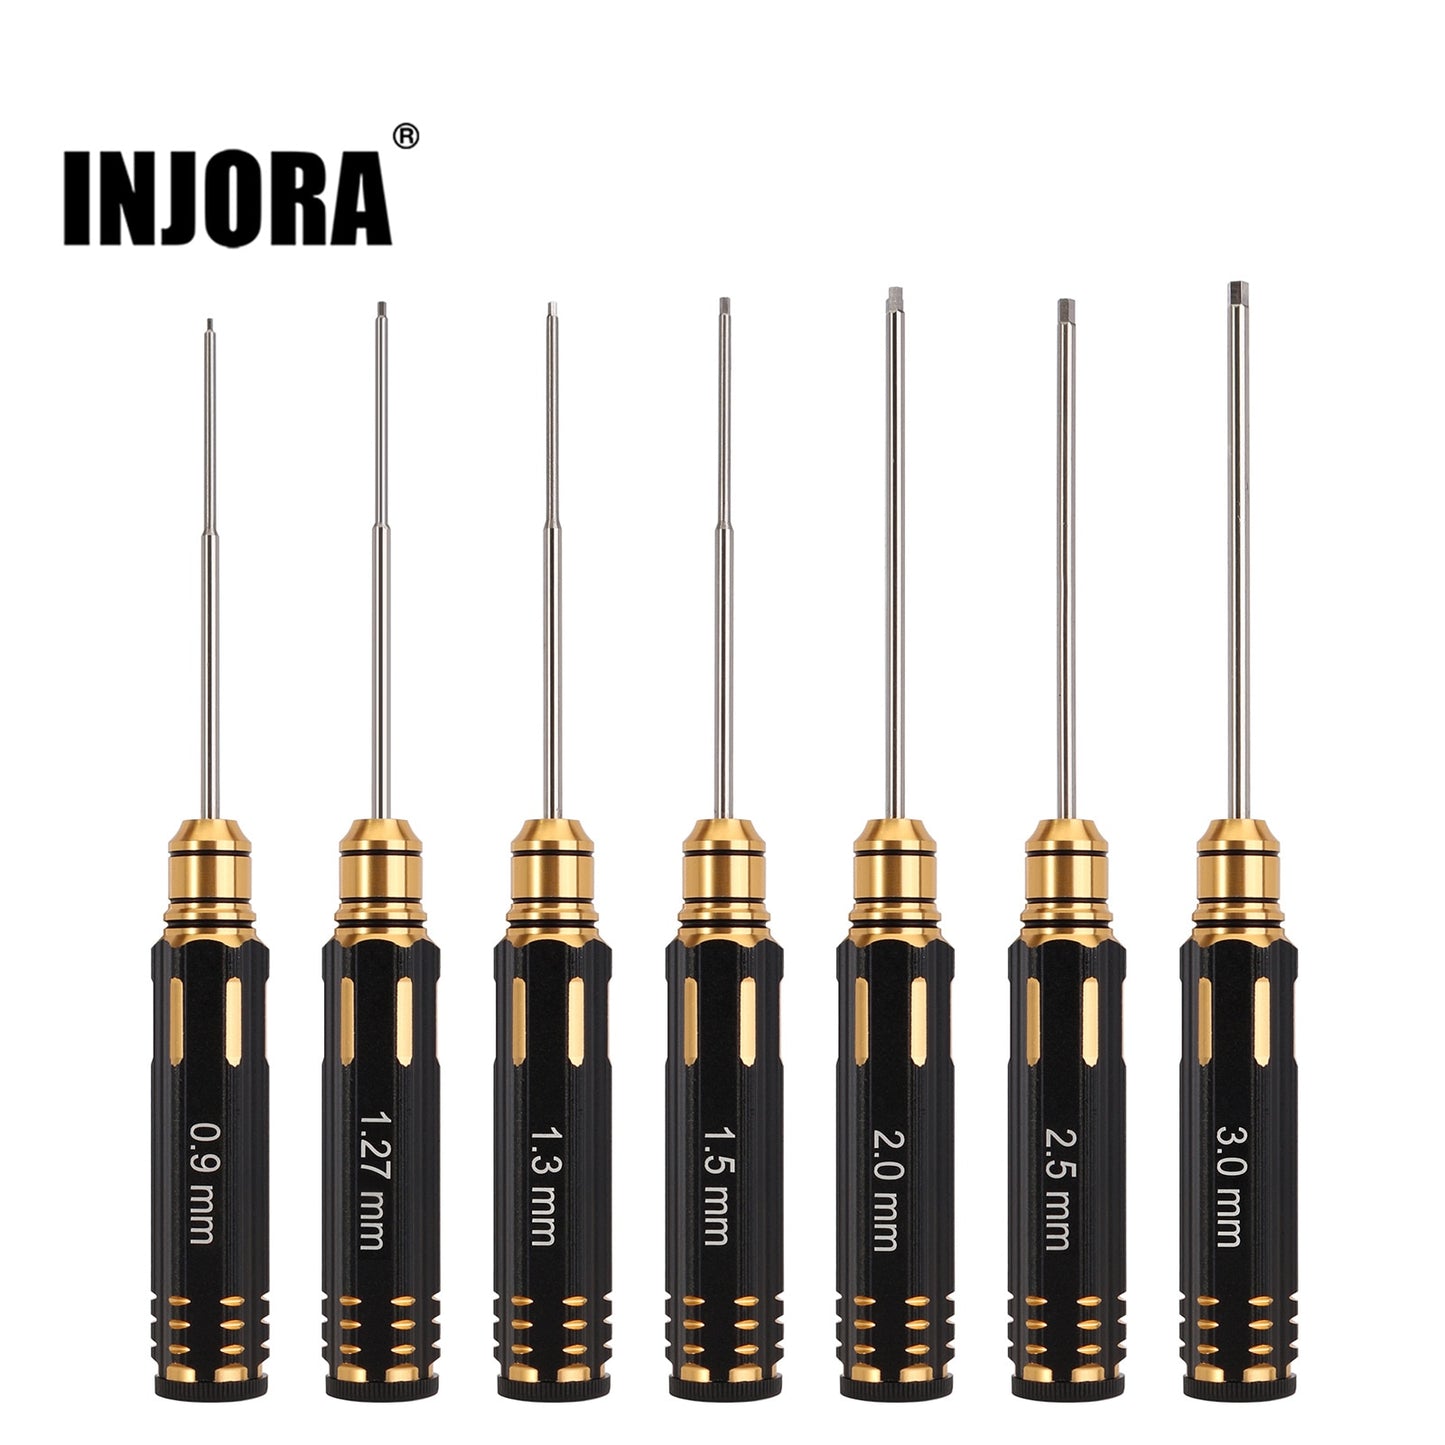 INJORA 0.9/1.27/1.3/1.5/2.0/2.5/3mm Hex RC Tool Kit HSS Steel Hexagon Screwdriver Set for RC Crawler Car Boat Helicopter Model